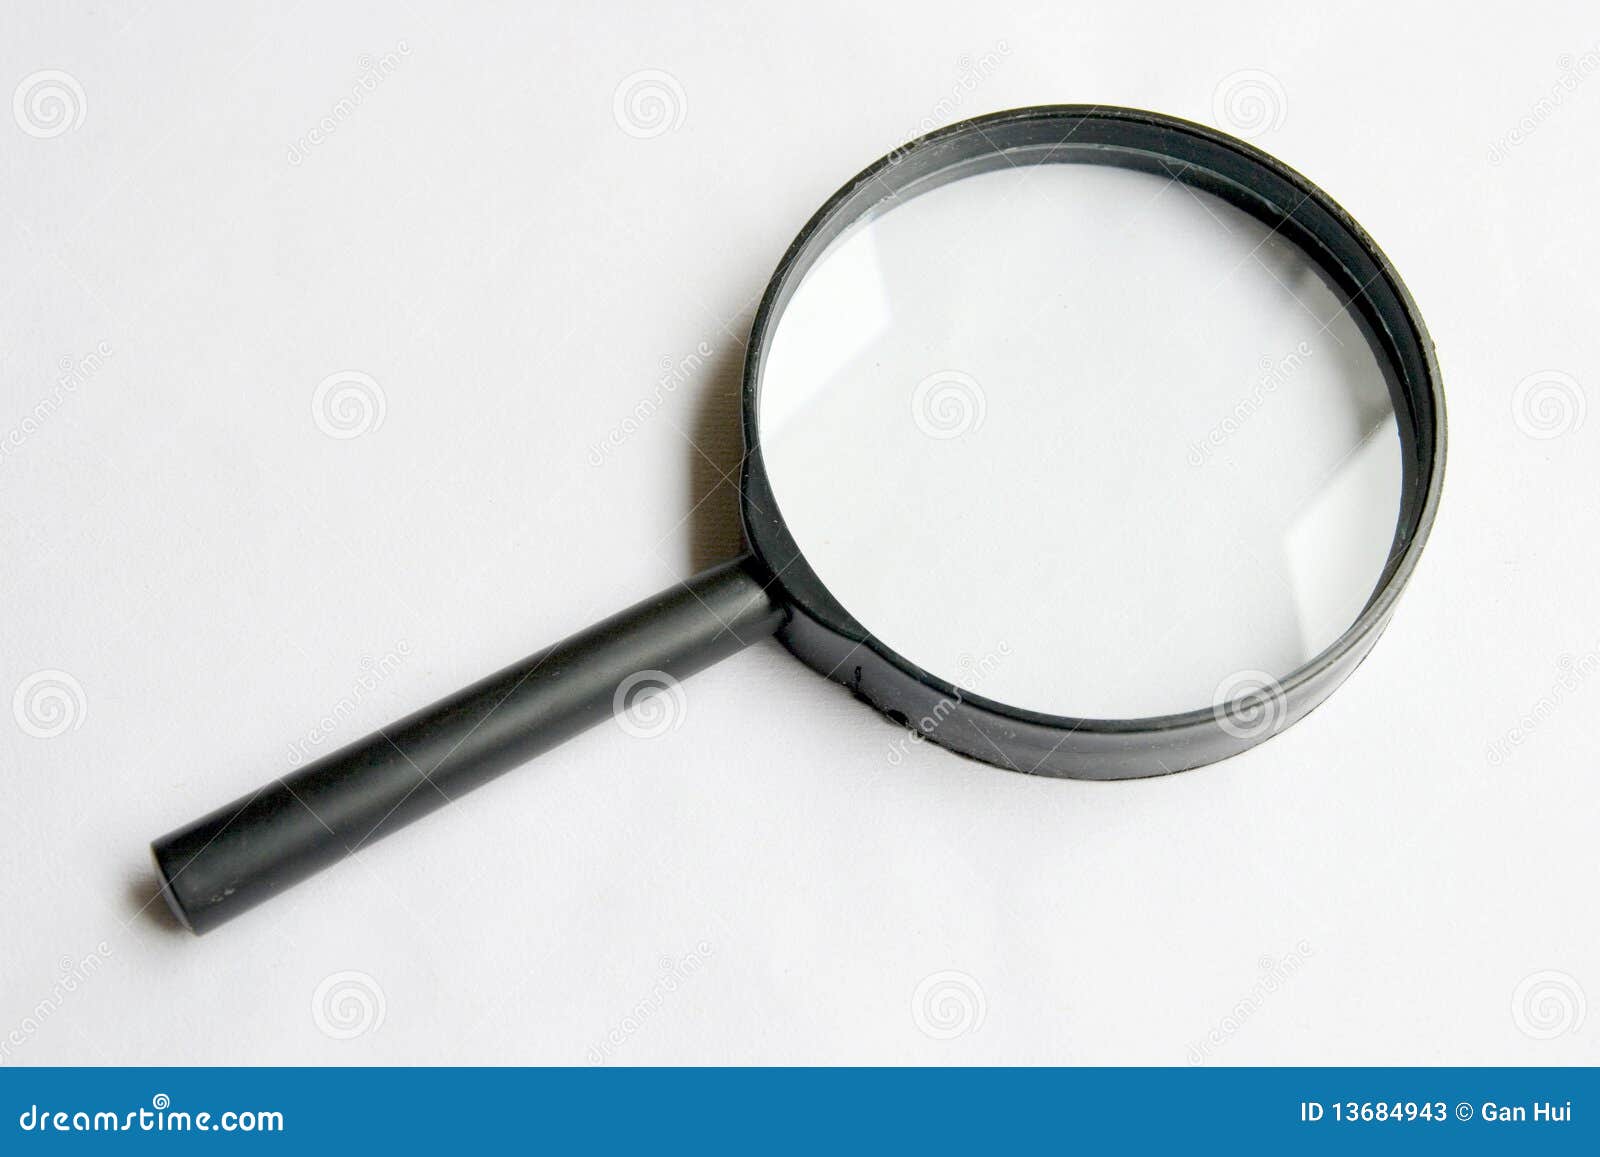 magnifier on white background